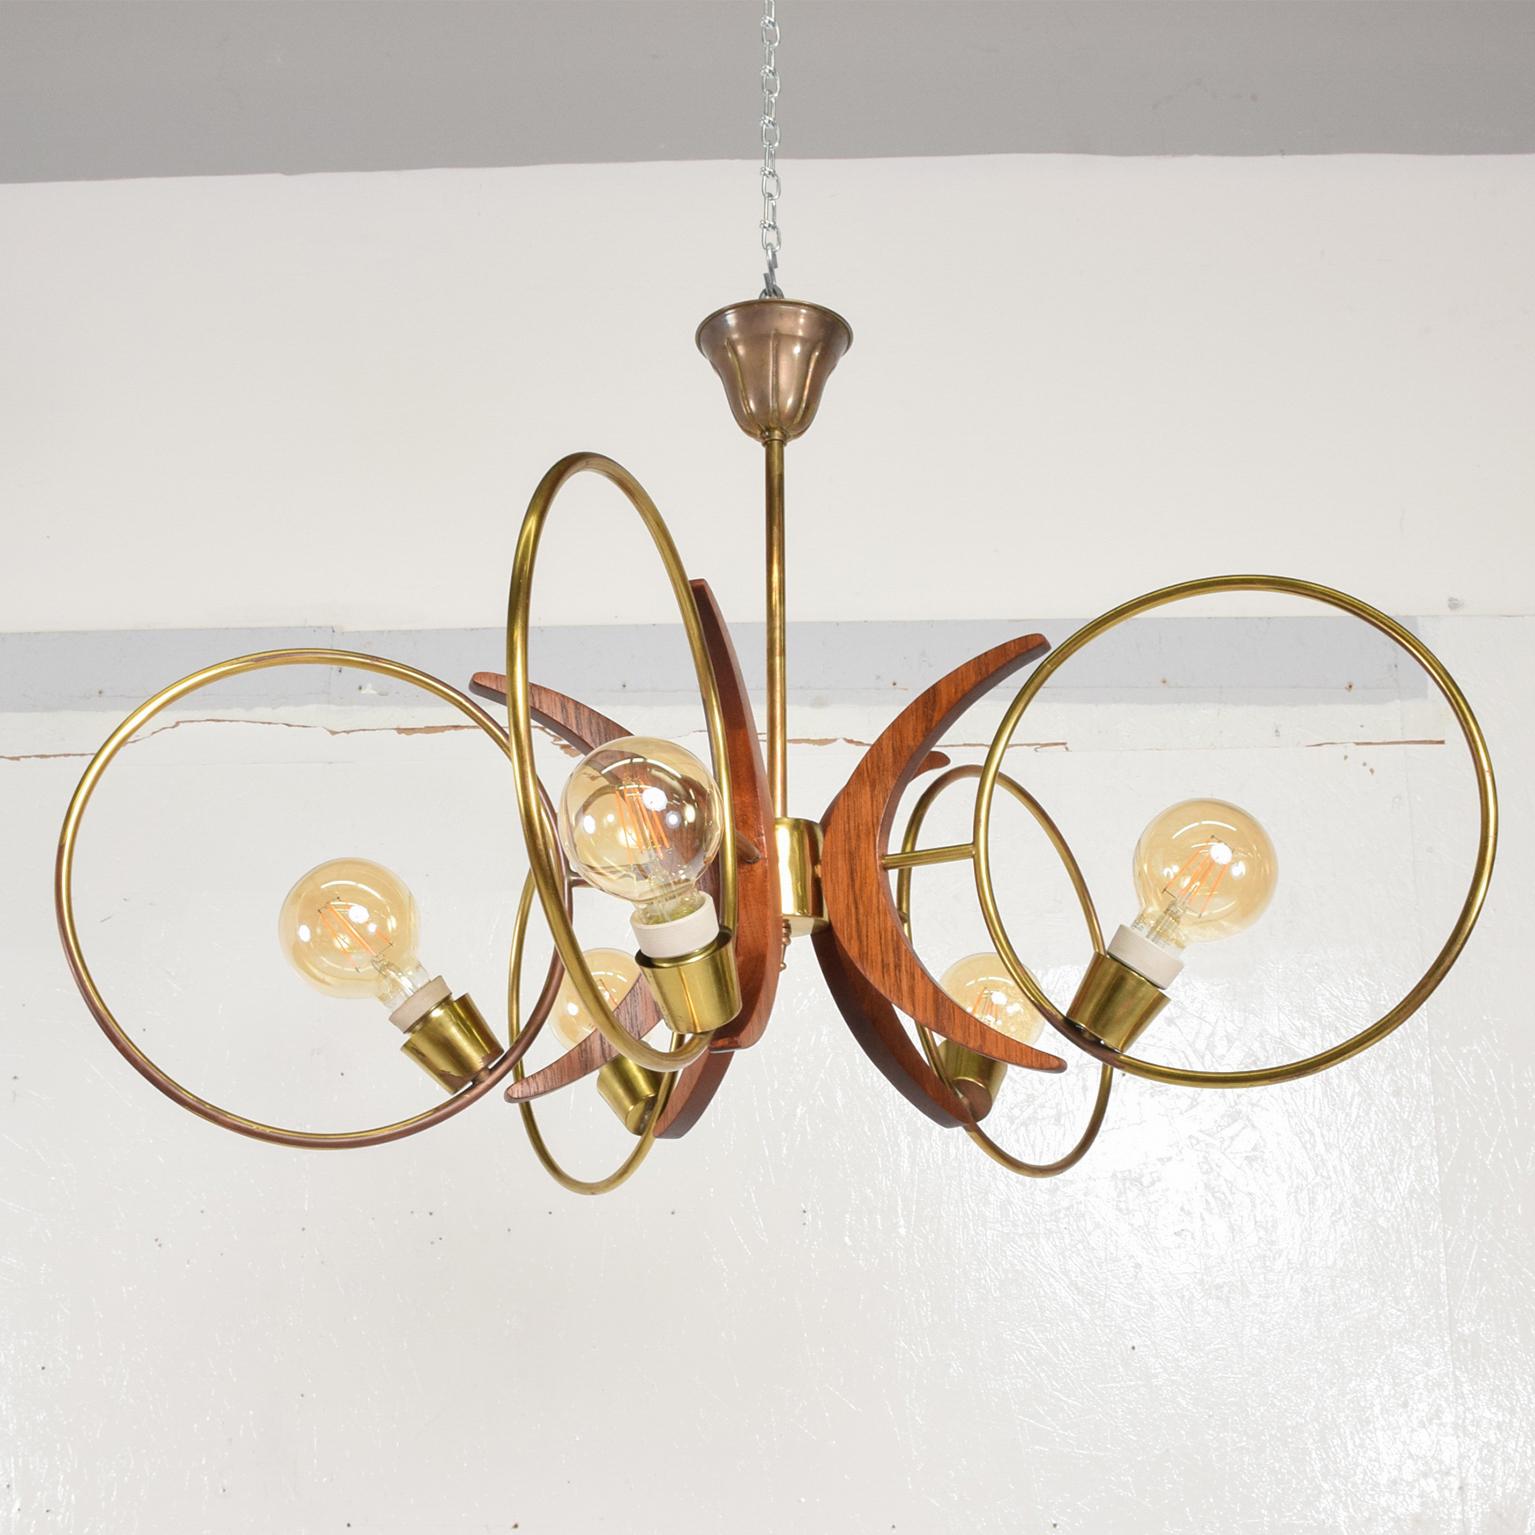 Modern Five Ring Swirling Sculptural Chandelier from Mexico City 1960s
Unmarked. Crisp Clean design.
Features five rings in patinated brass sculptural mahogany wood ornamentation.
33 in diameter x 22 tall inches.
Vintage patina on brass. 
Original